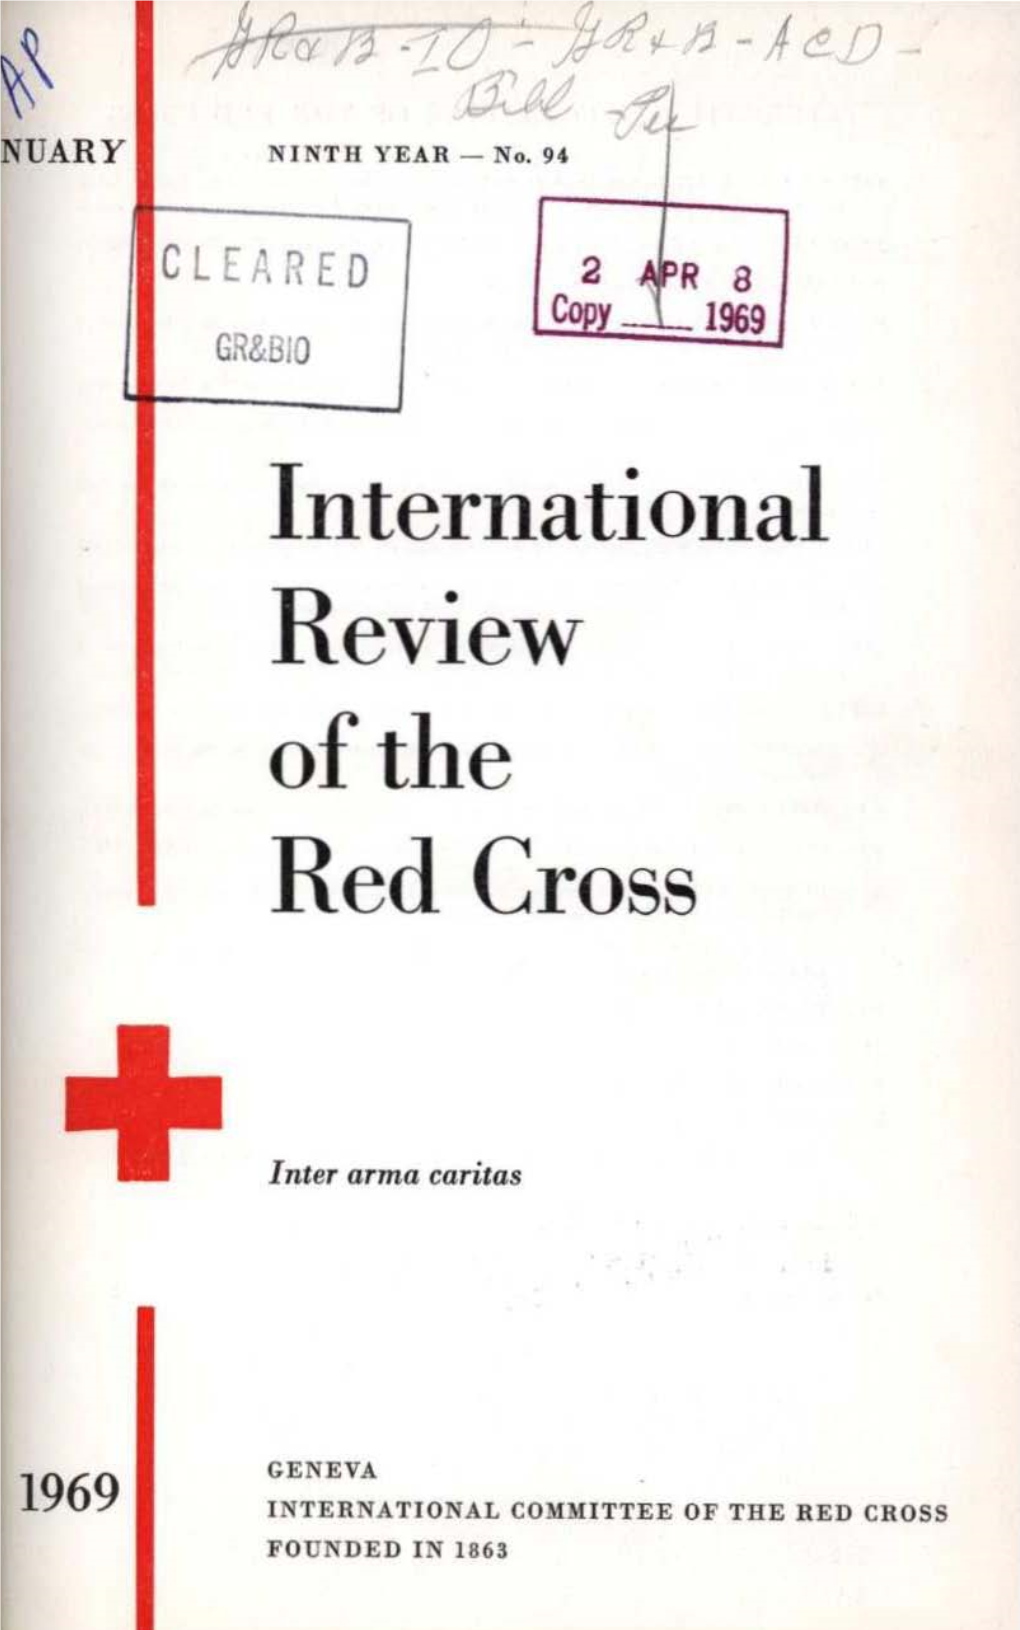 International Review of the Red Cross, January 1969, Ninth Year